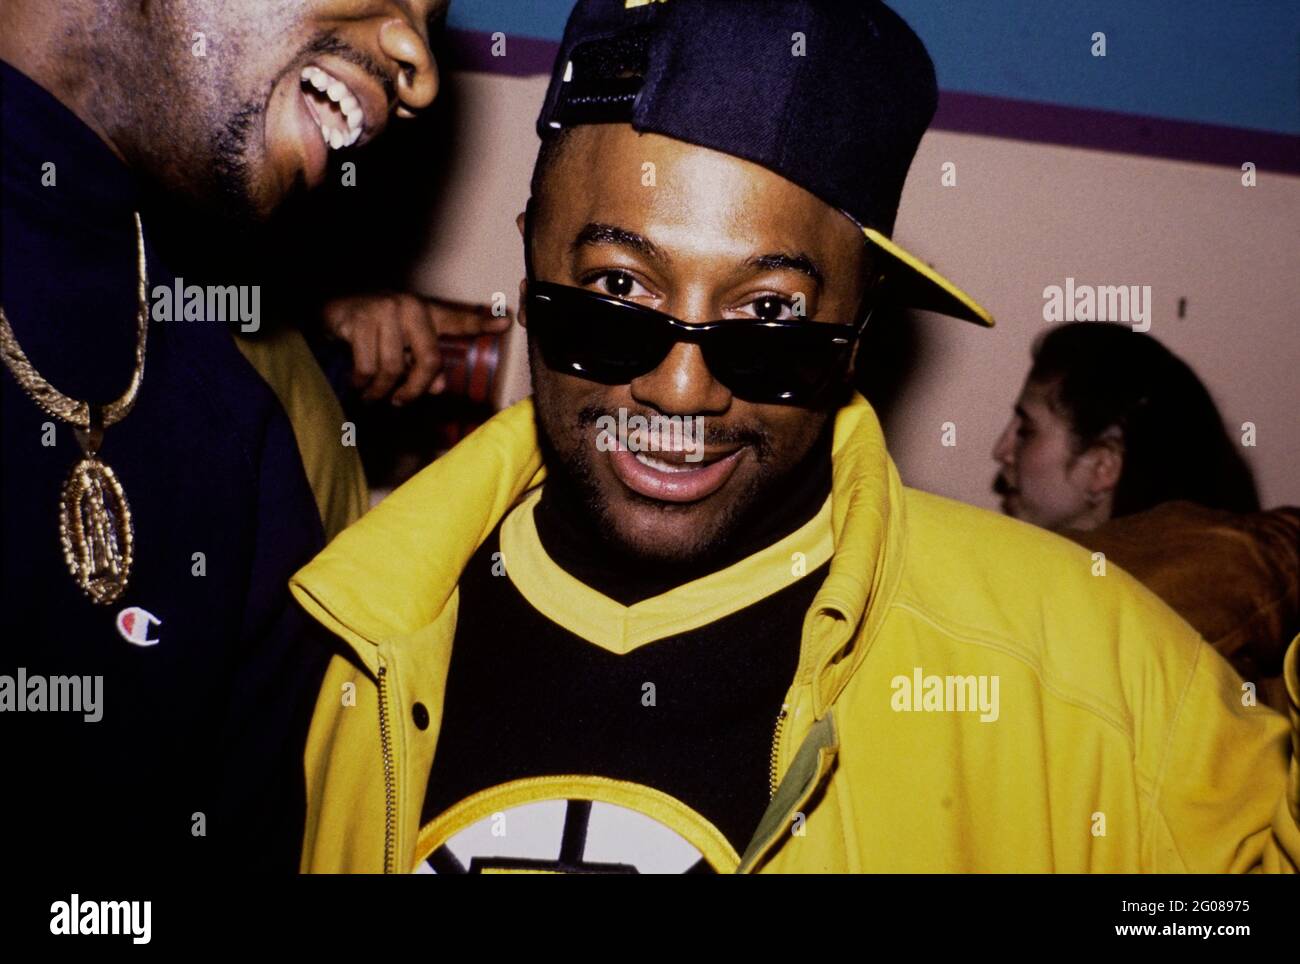 Busy Bee Starsky at a hip hop event at SoBs club, New York, 1991 Stock Photo